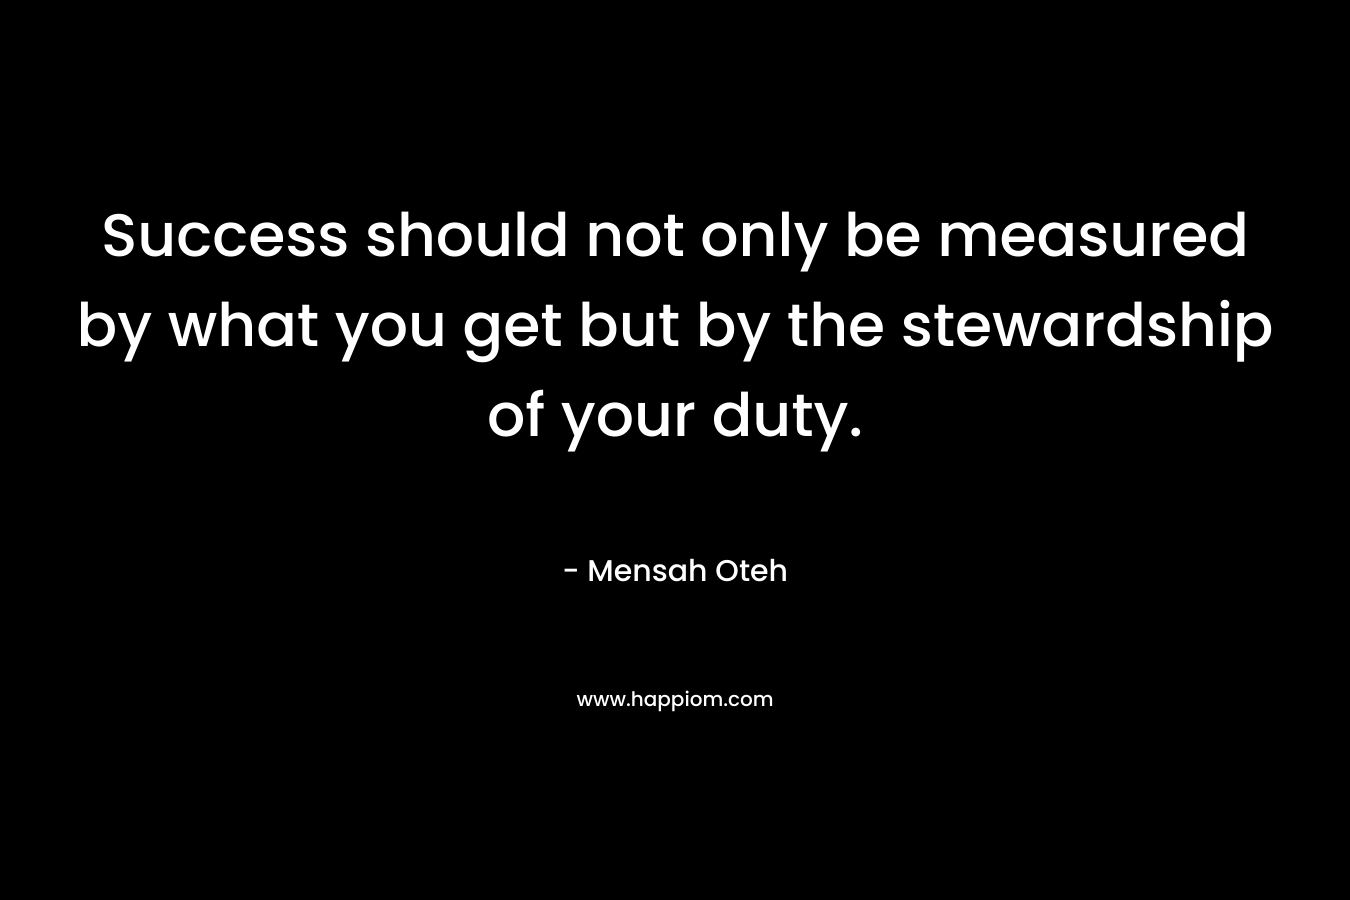 Success should not only be measured by what you get but by the stewardship of your duty.